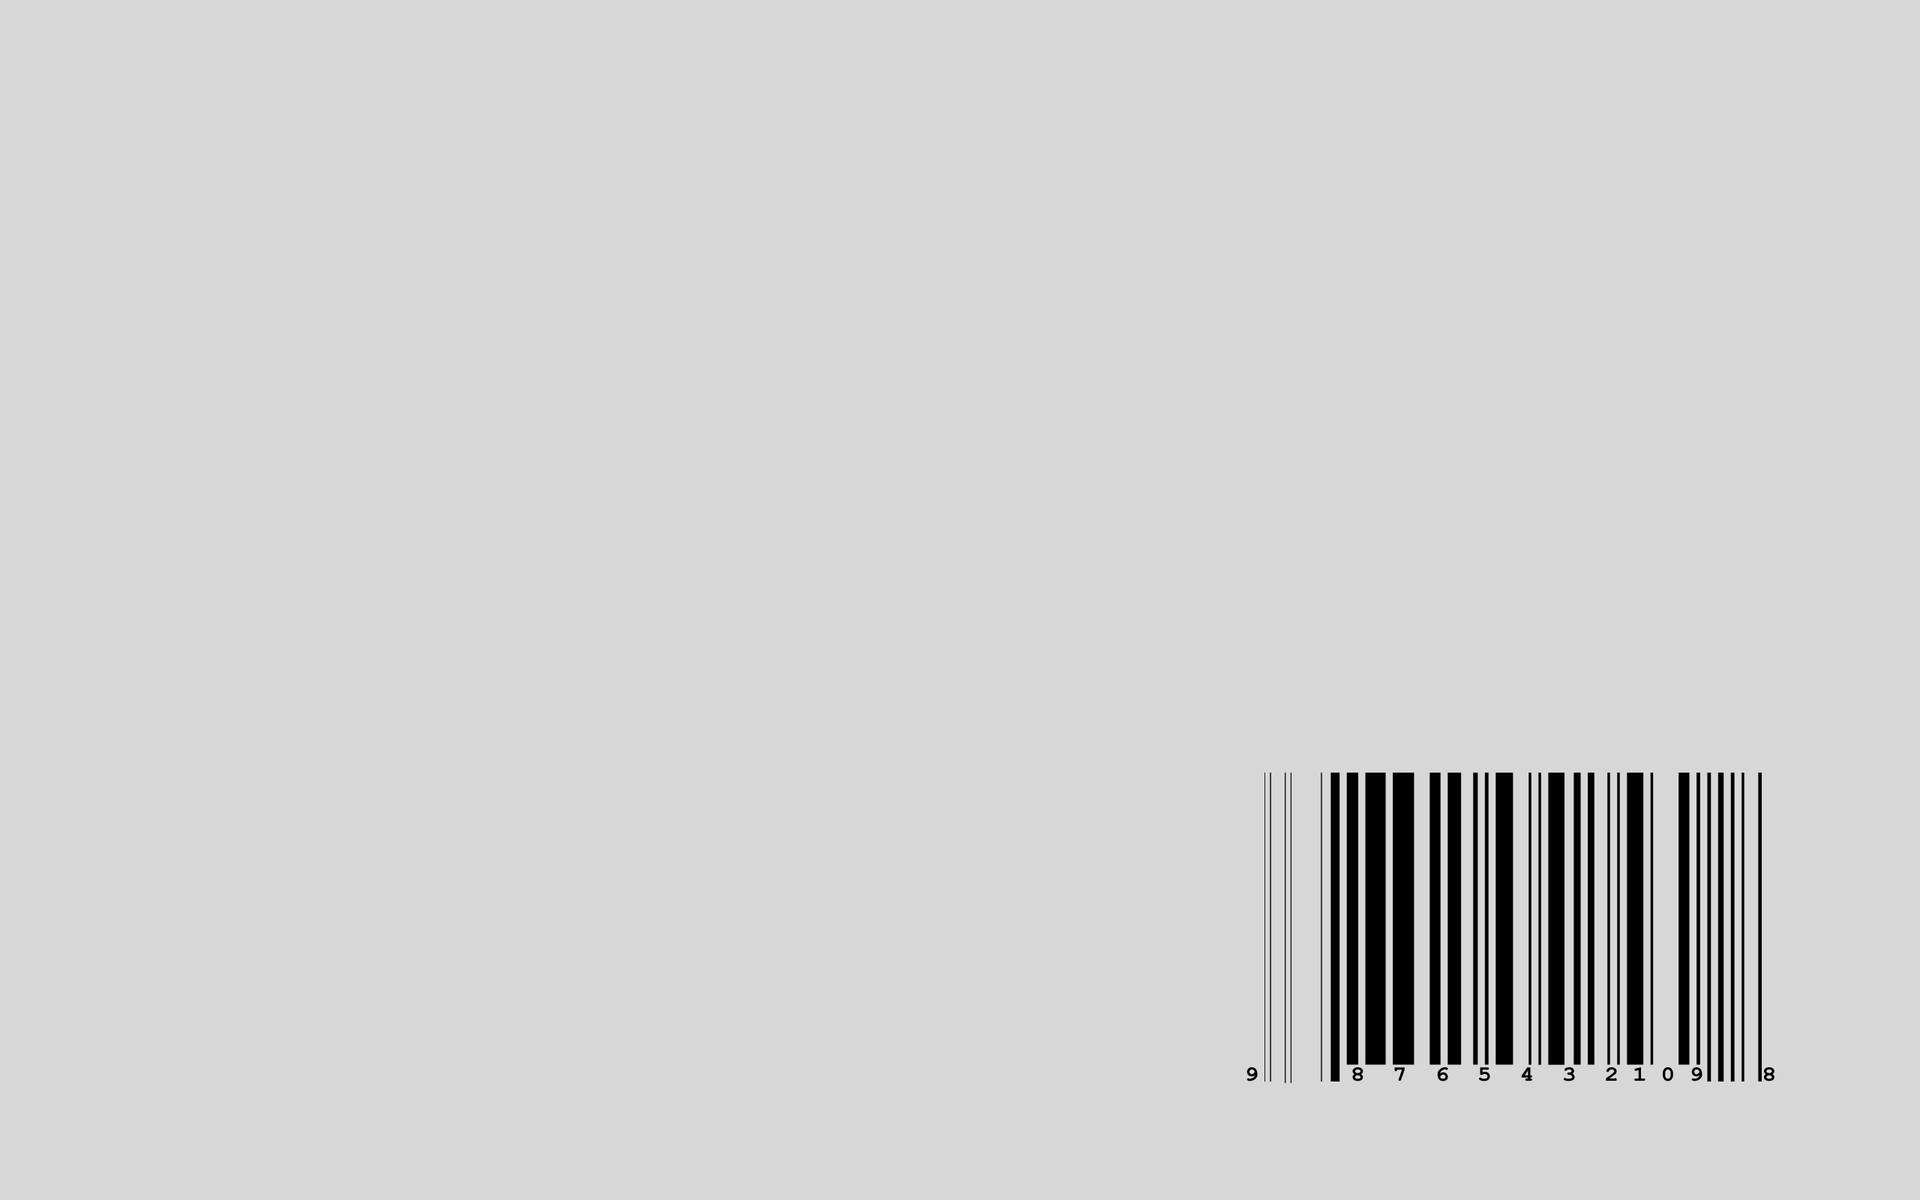 Simple Aesthetic Barcode